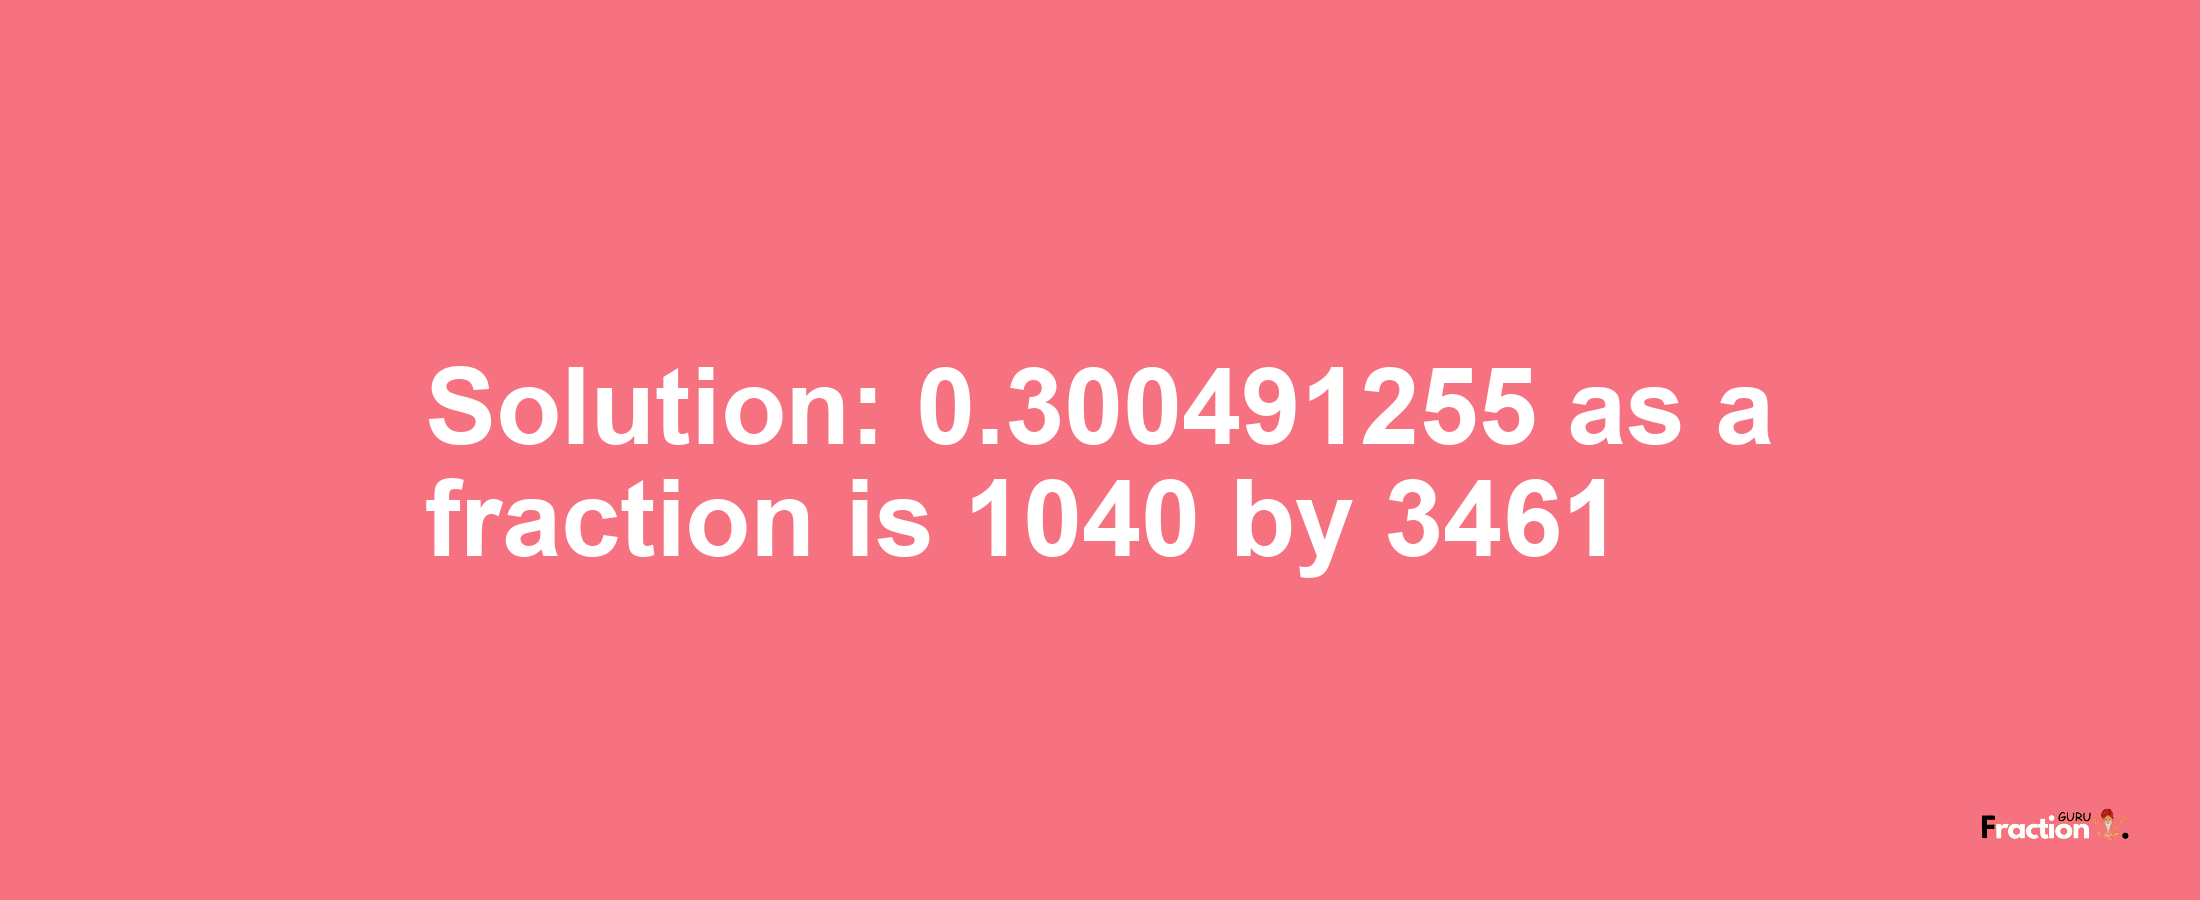 Solution:0.300491255 as a fraction is 1040/3461